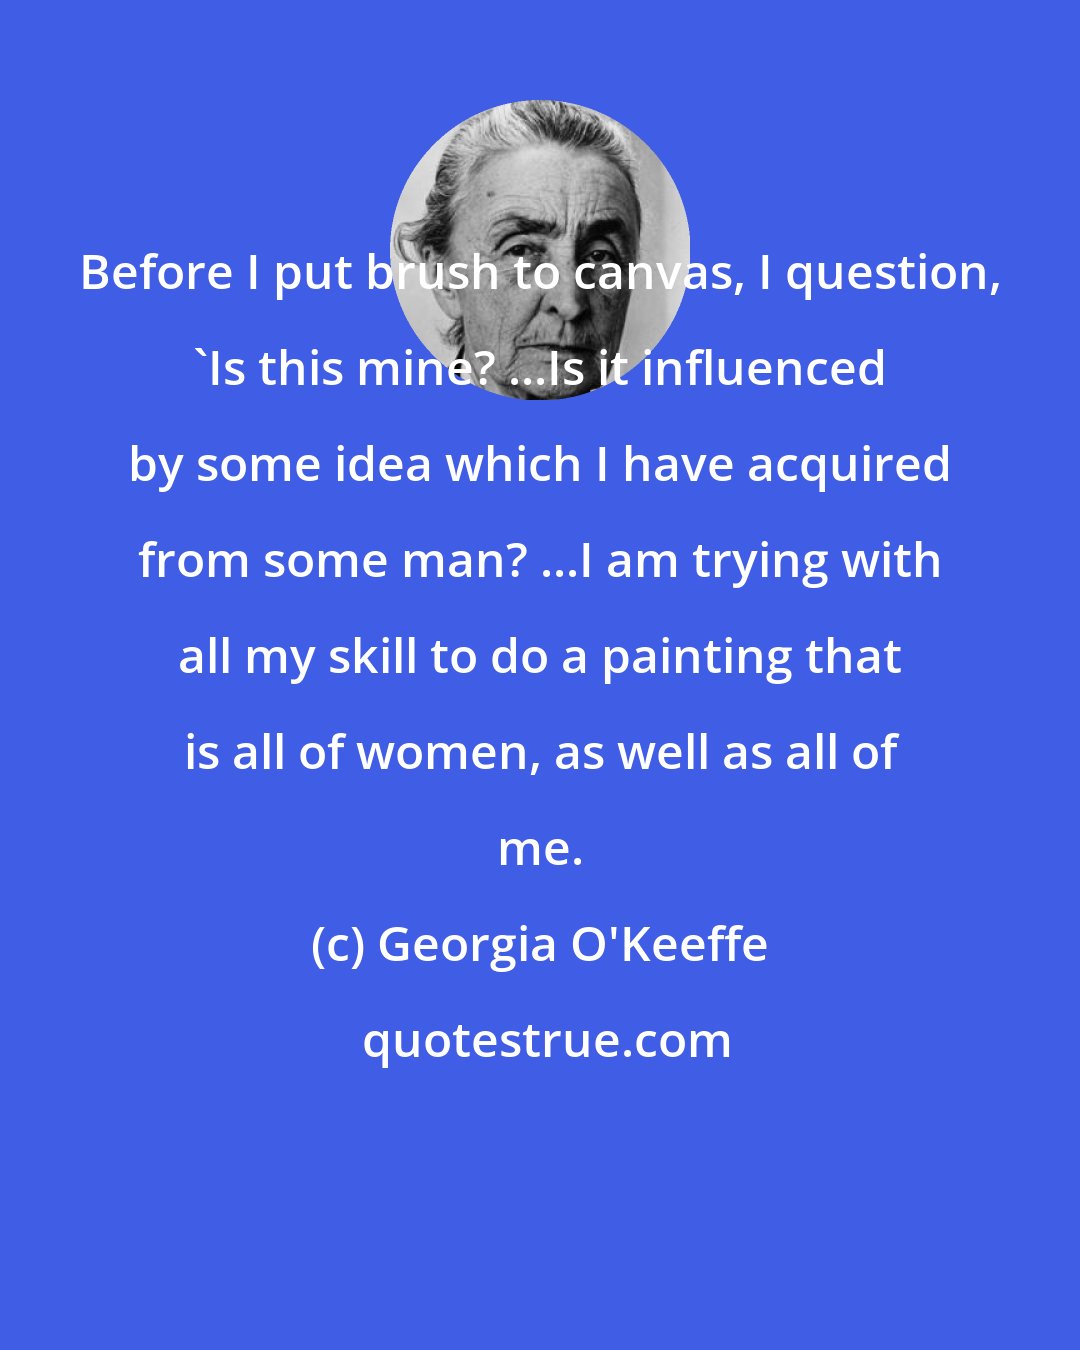 Georgia O'Keeffe: Before I put brush to canvas, I question, 'Is this mine? ...Is it influenced by some idea which I have acquired from some man? ...I am trying with all my skill to do a painting that is all of women, as well as all of me.